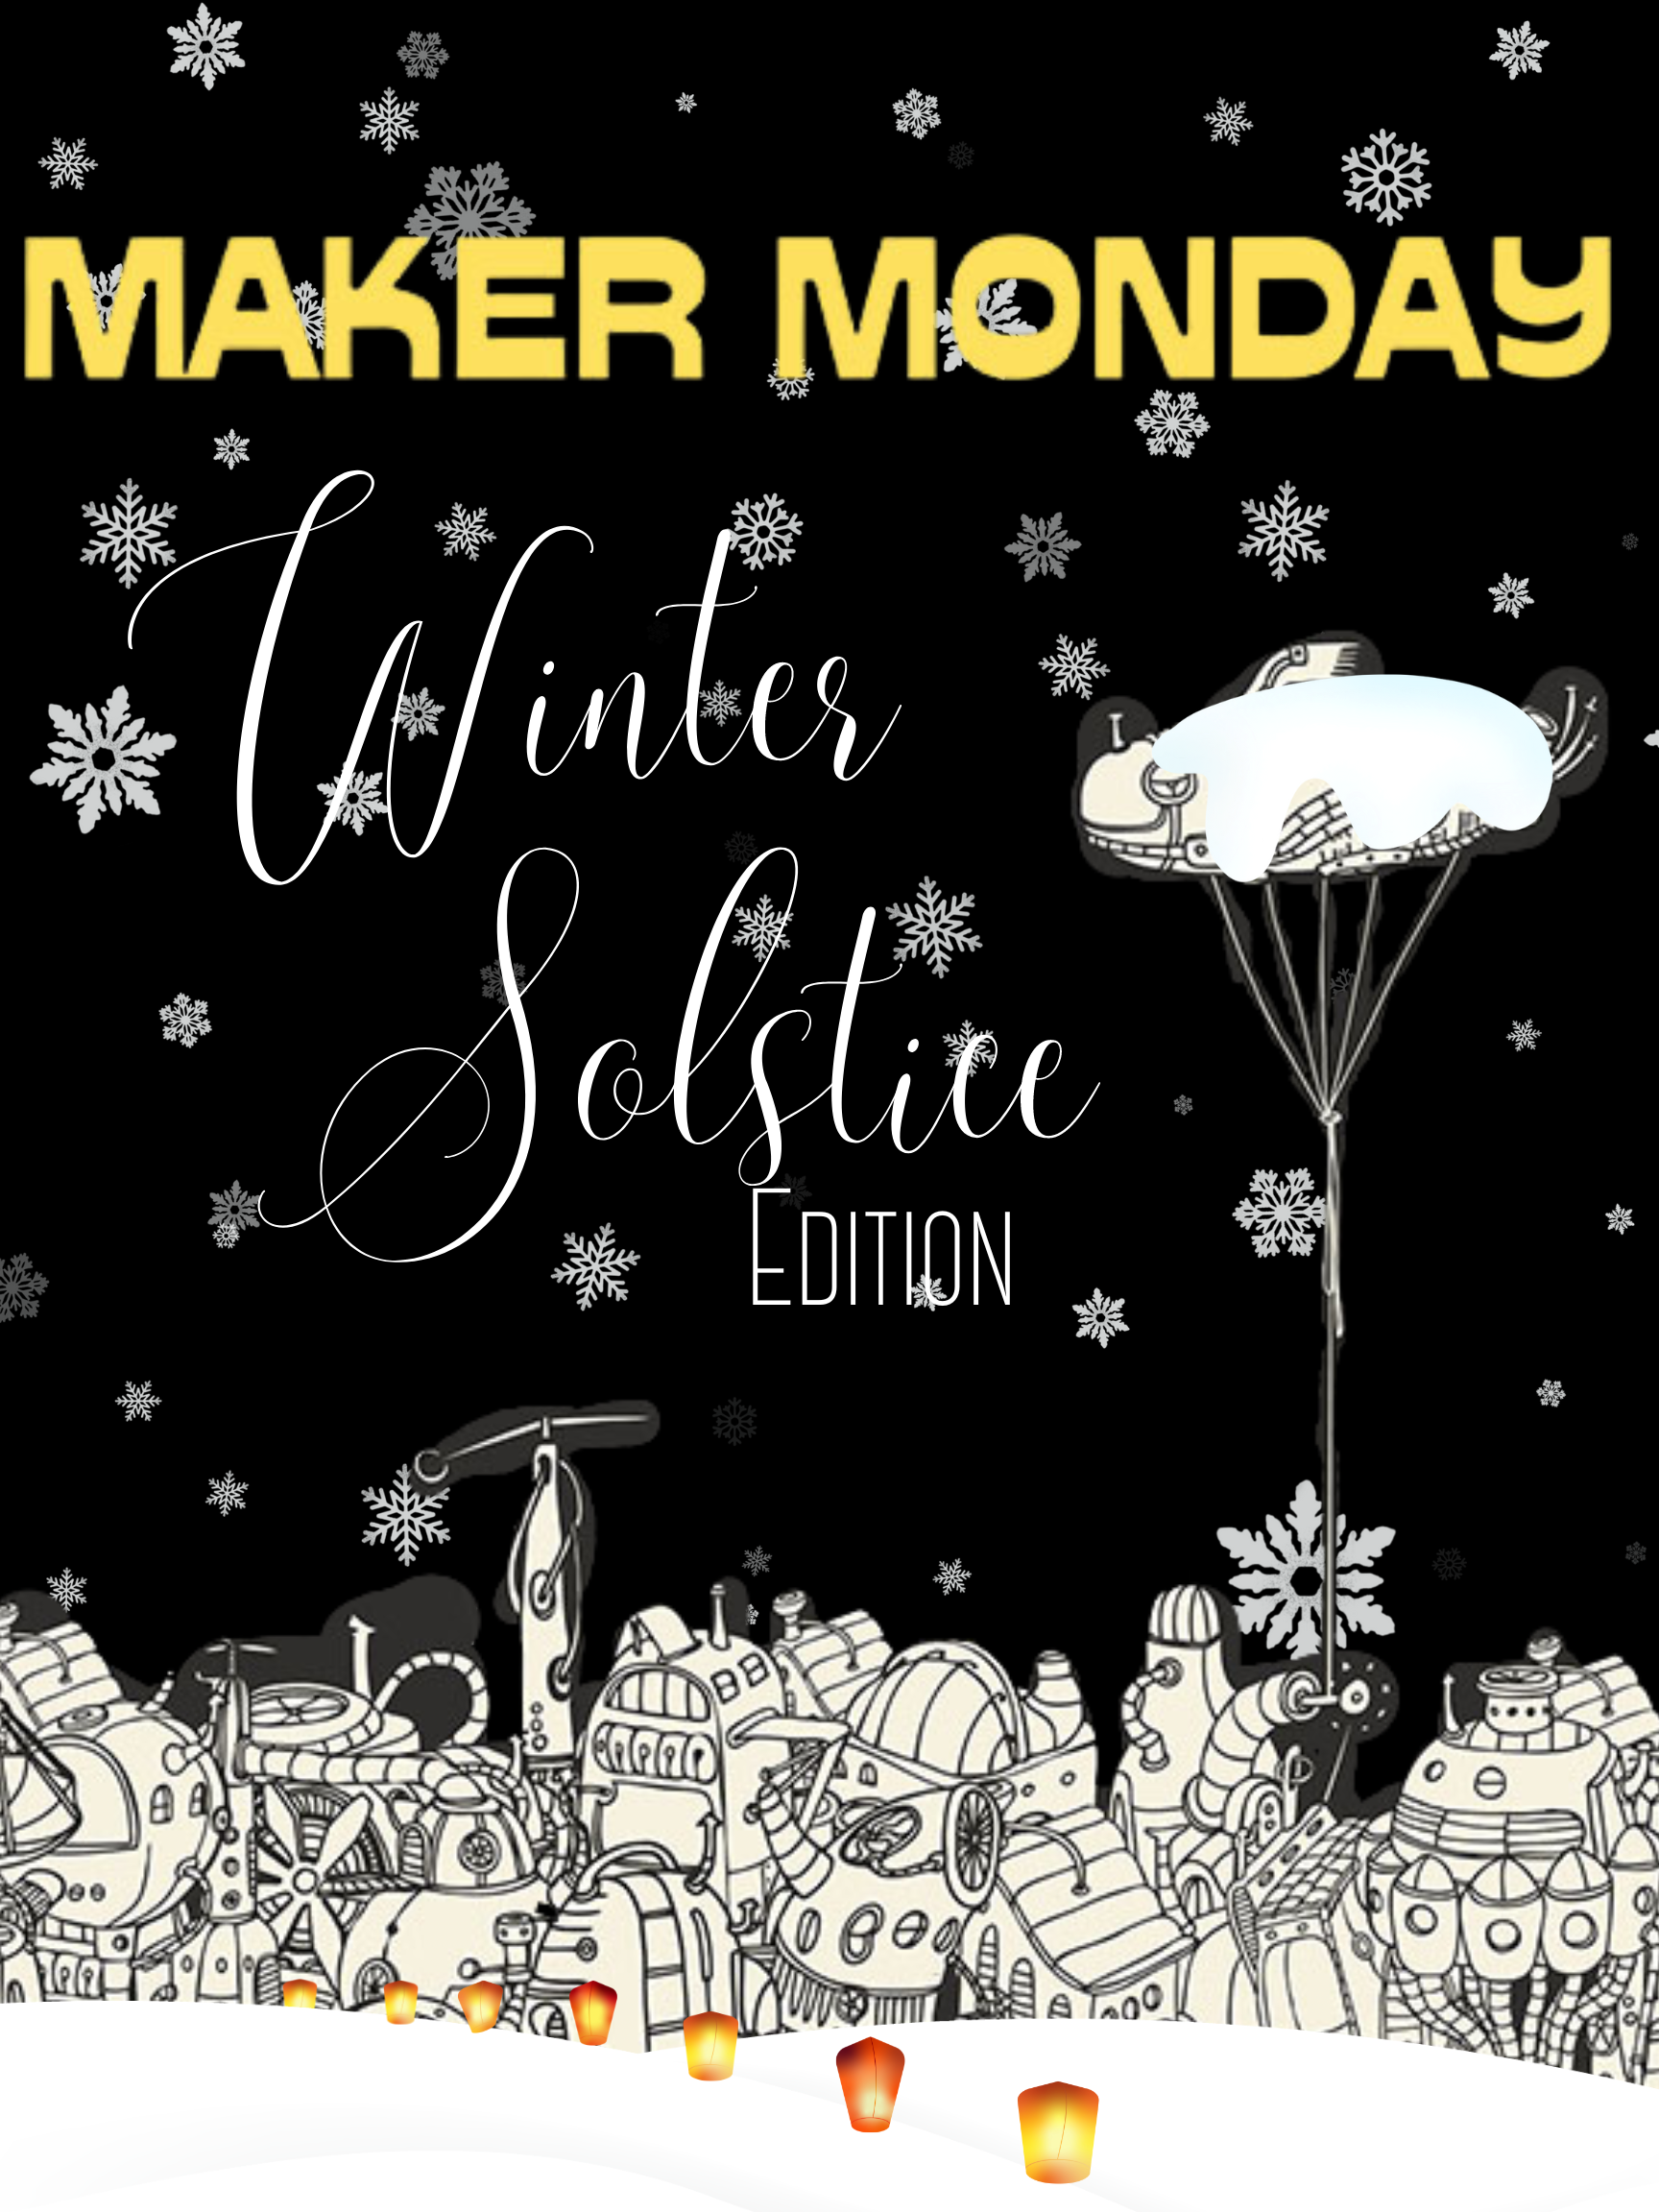 Winter Solstice Edition of the Maker Monday poster.